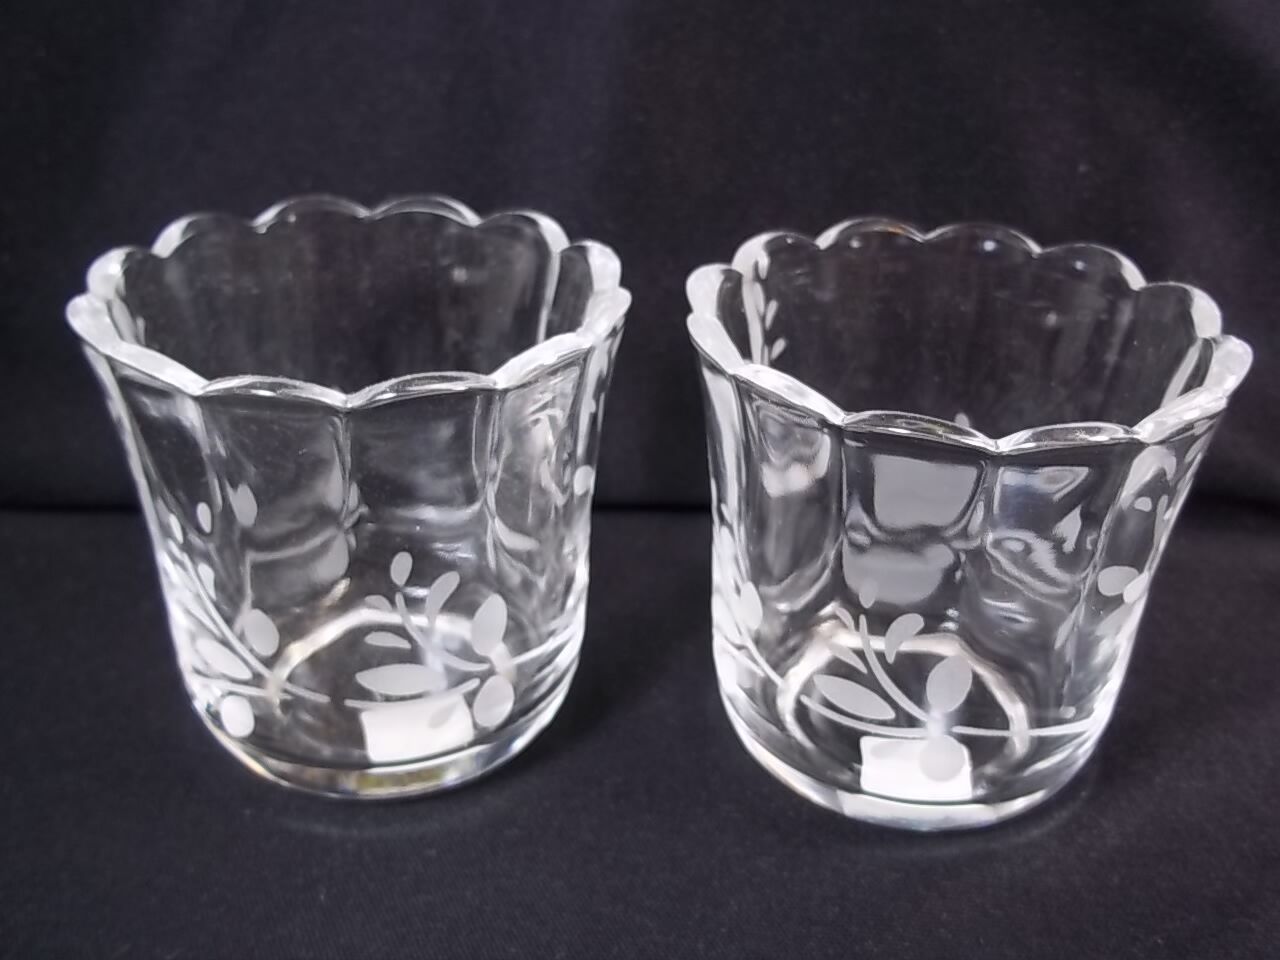 Pair of etched votive holders Partylite white etched leaves scalloped rims 2.5" - $12.88